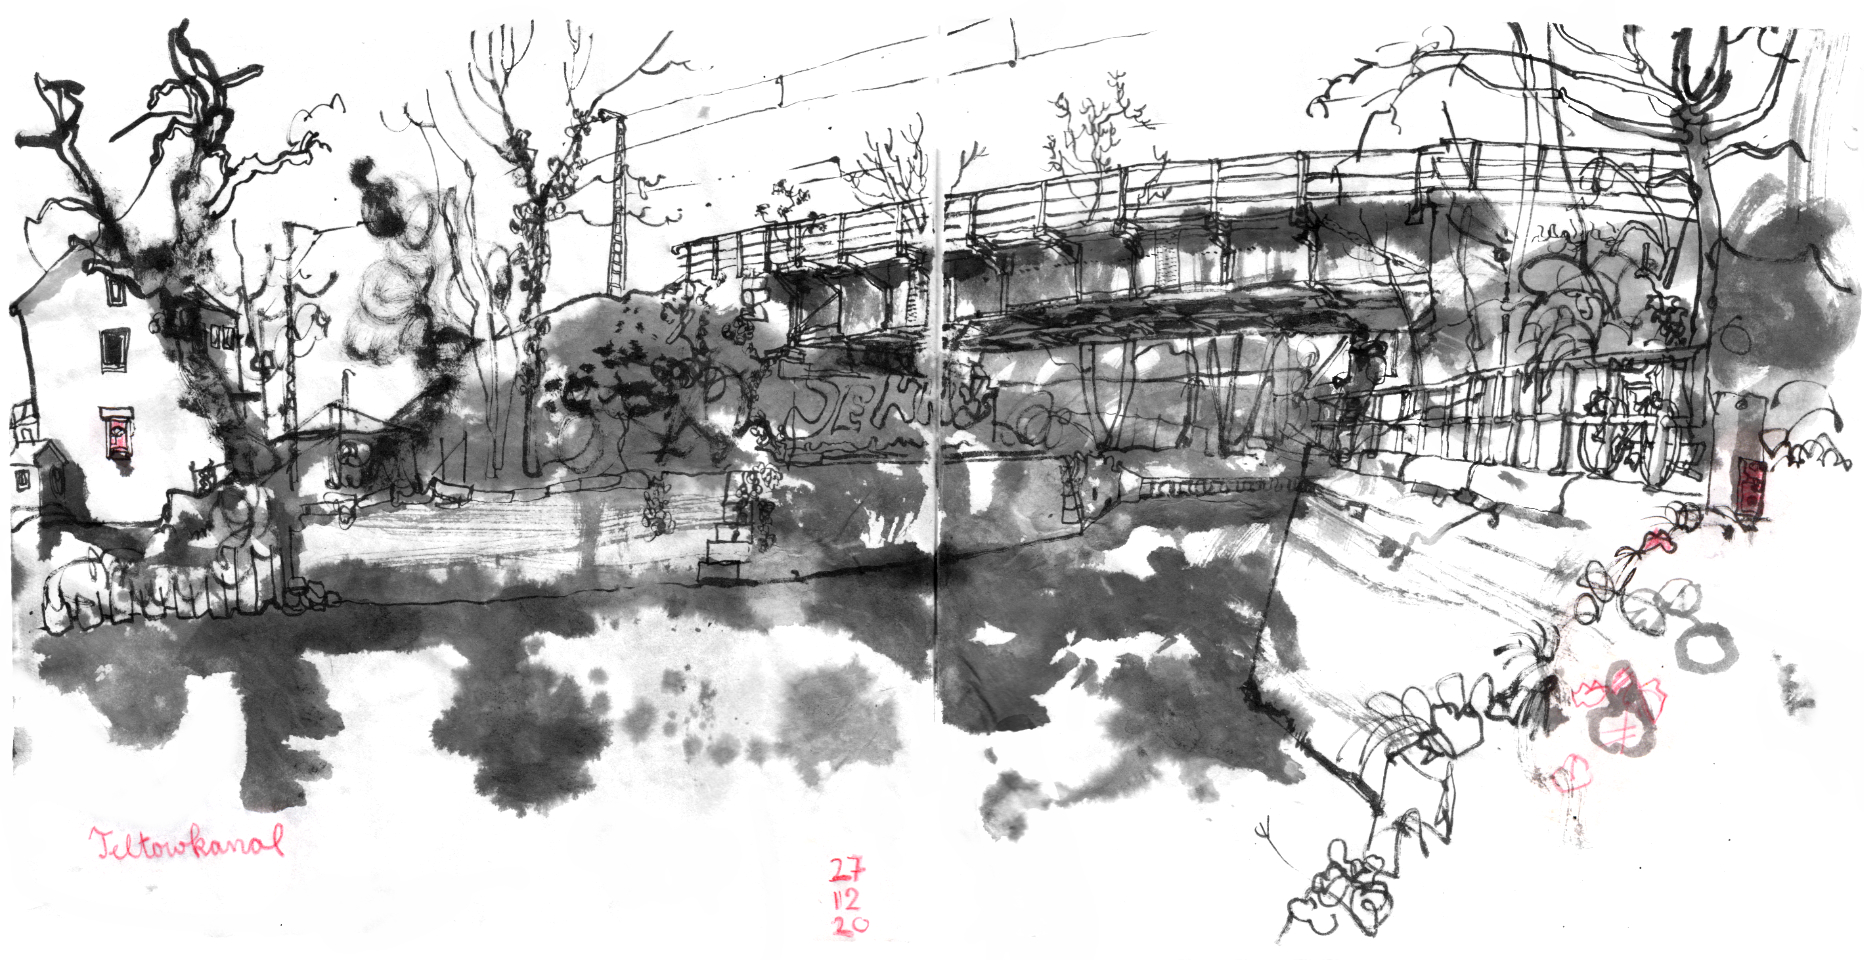 ink drawing of a railway bridge crossing a canal, trees (without leafs), a house on the left,